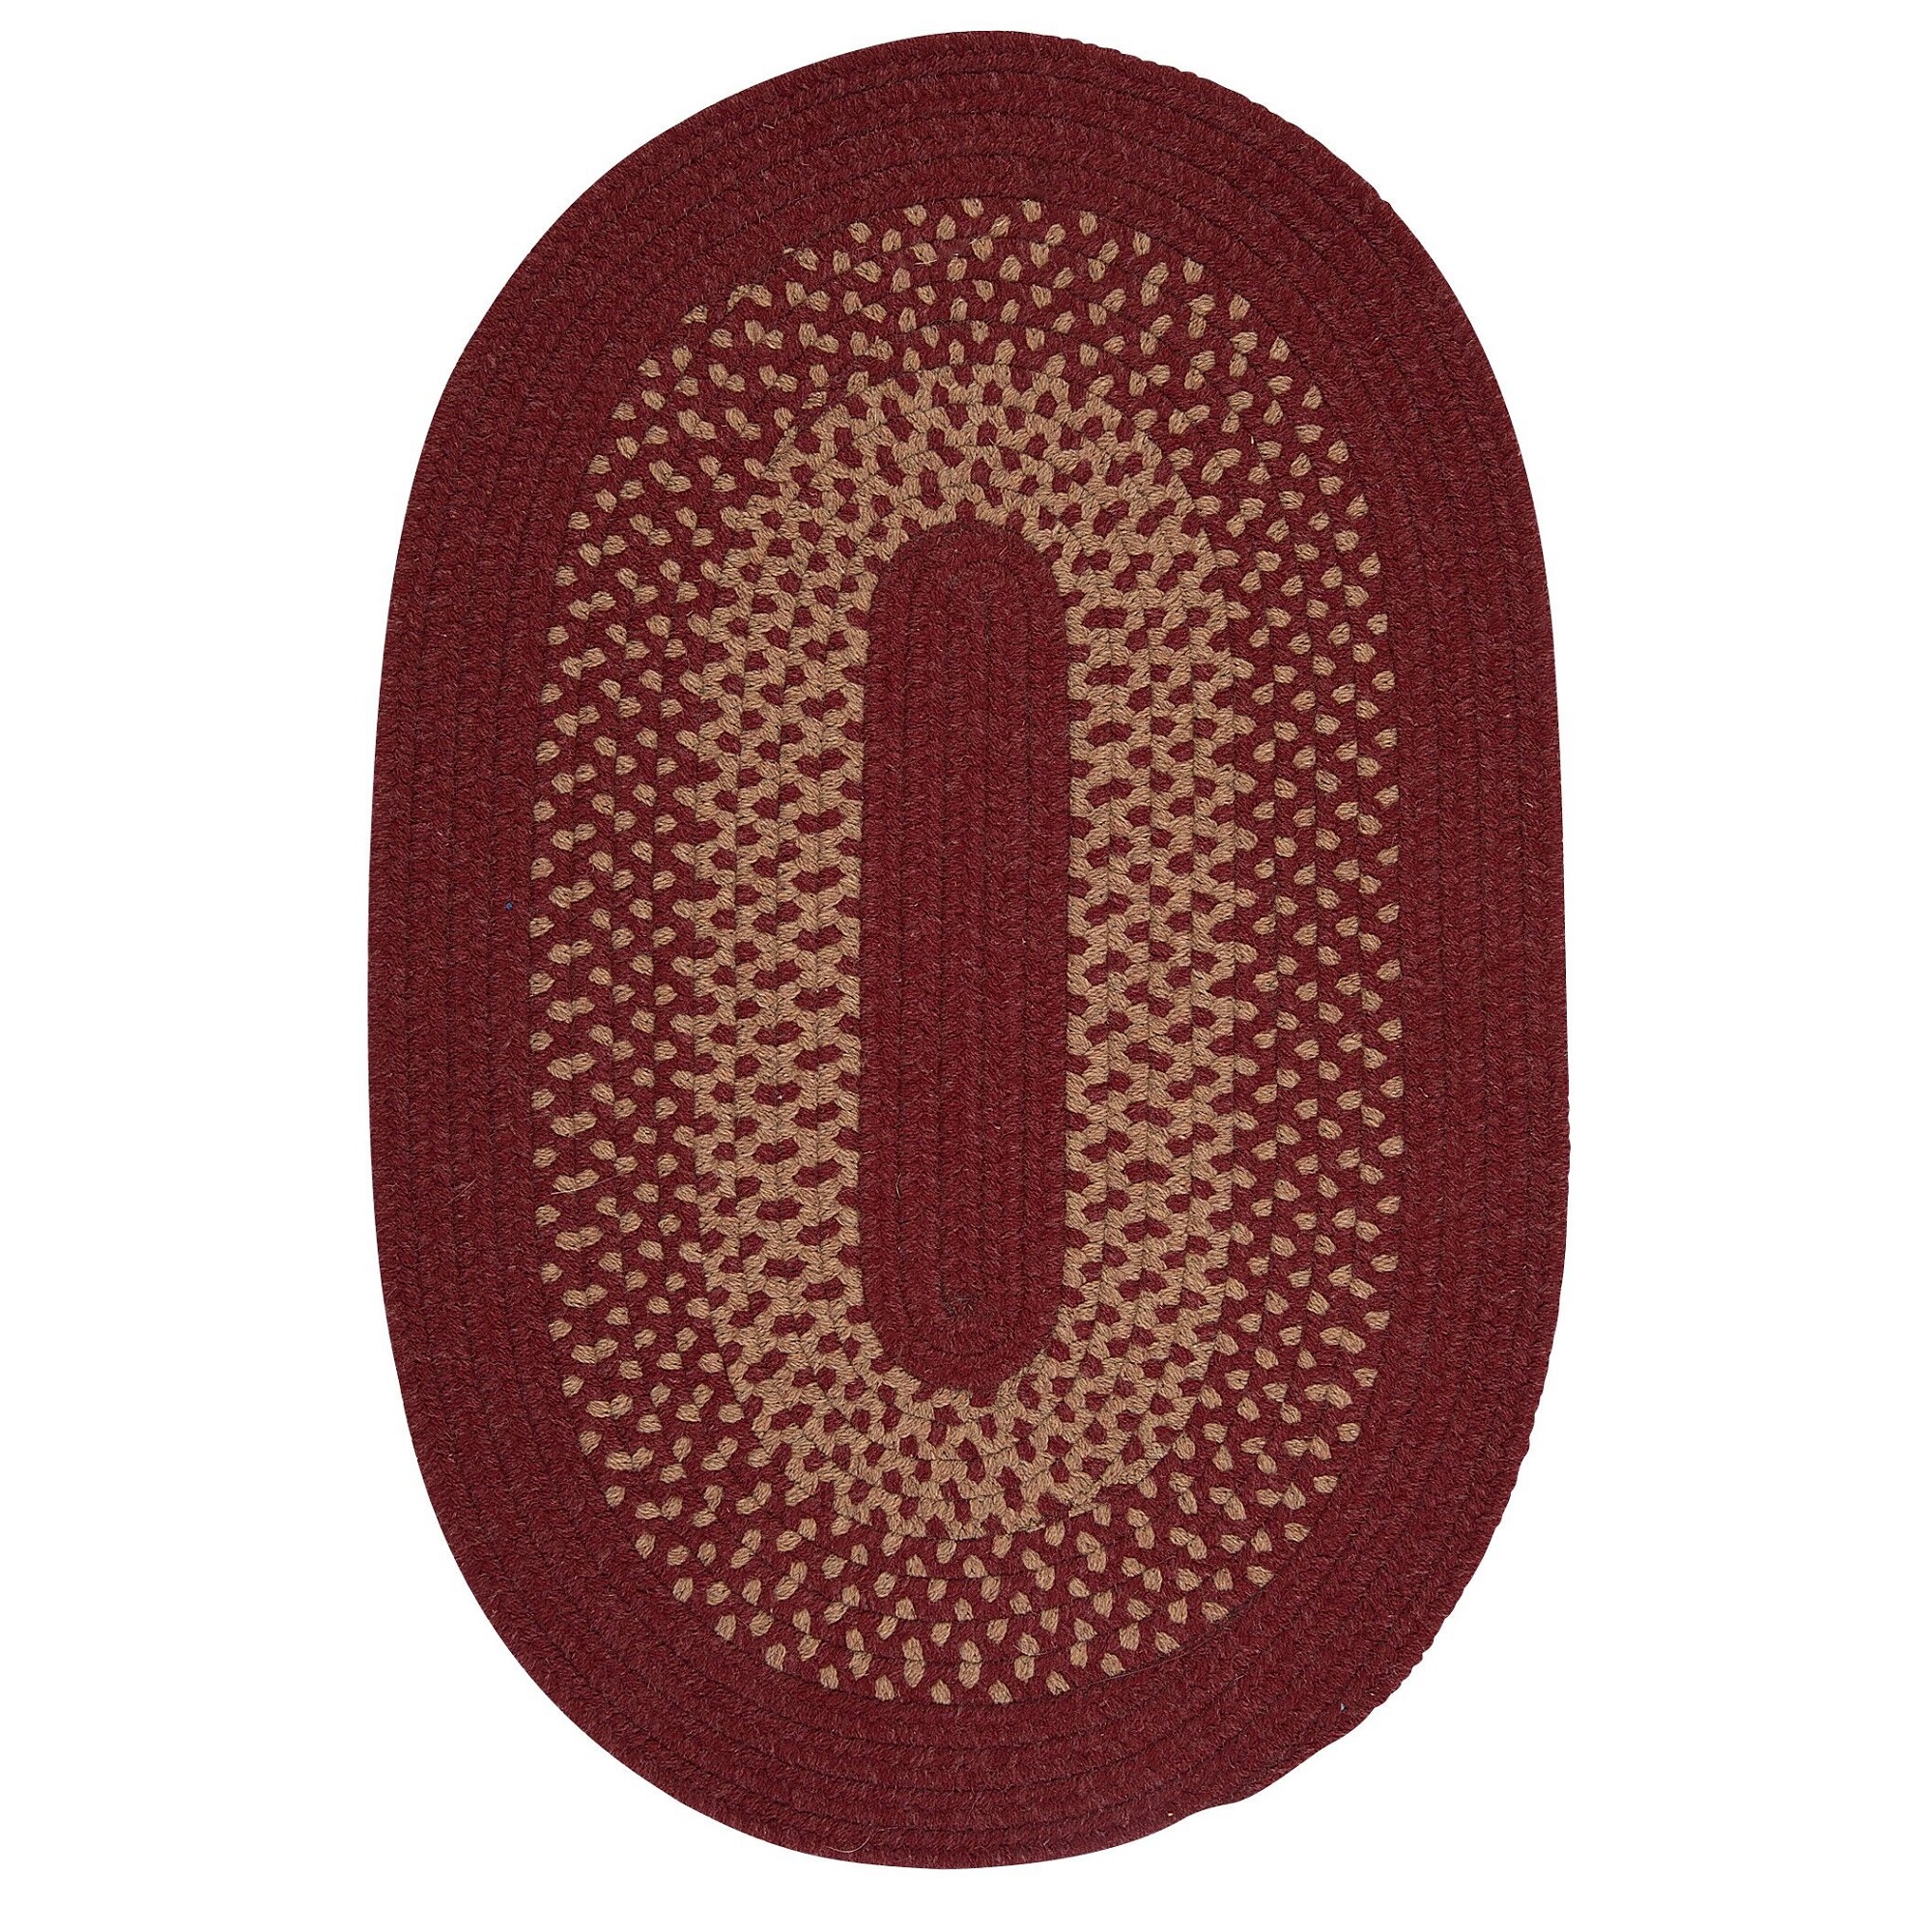 Colonial Mills 2' x 4' Red and Beige Braided Oval Area Throw Rug